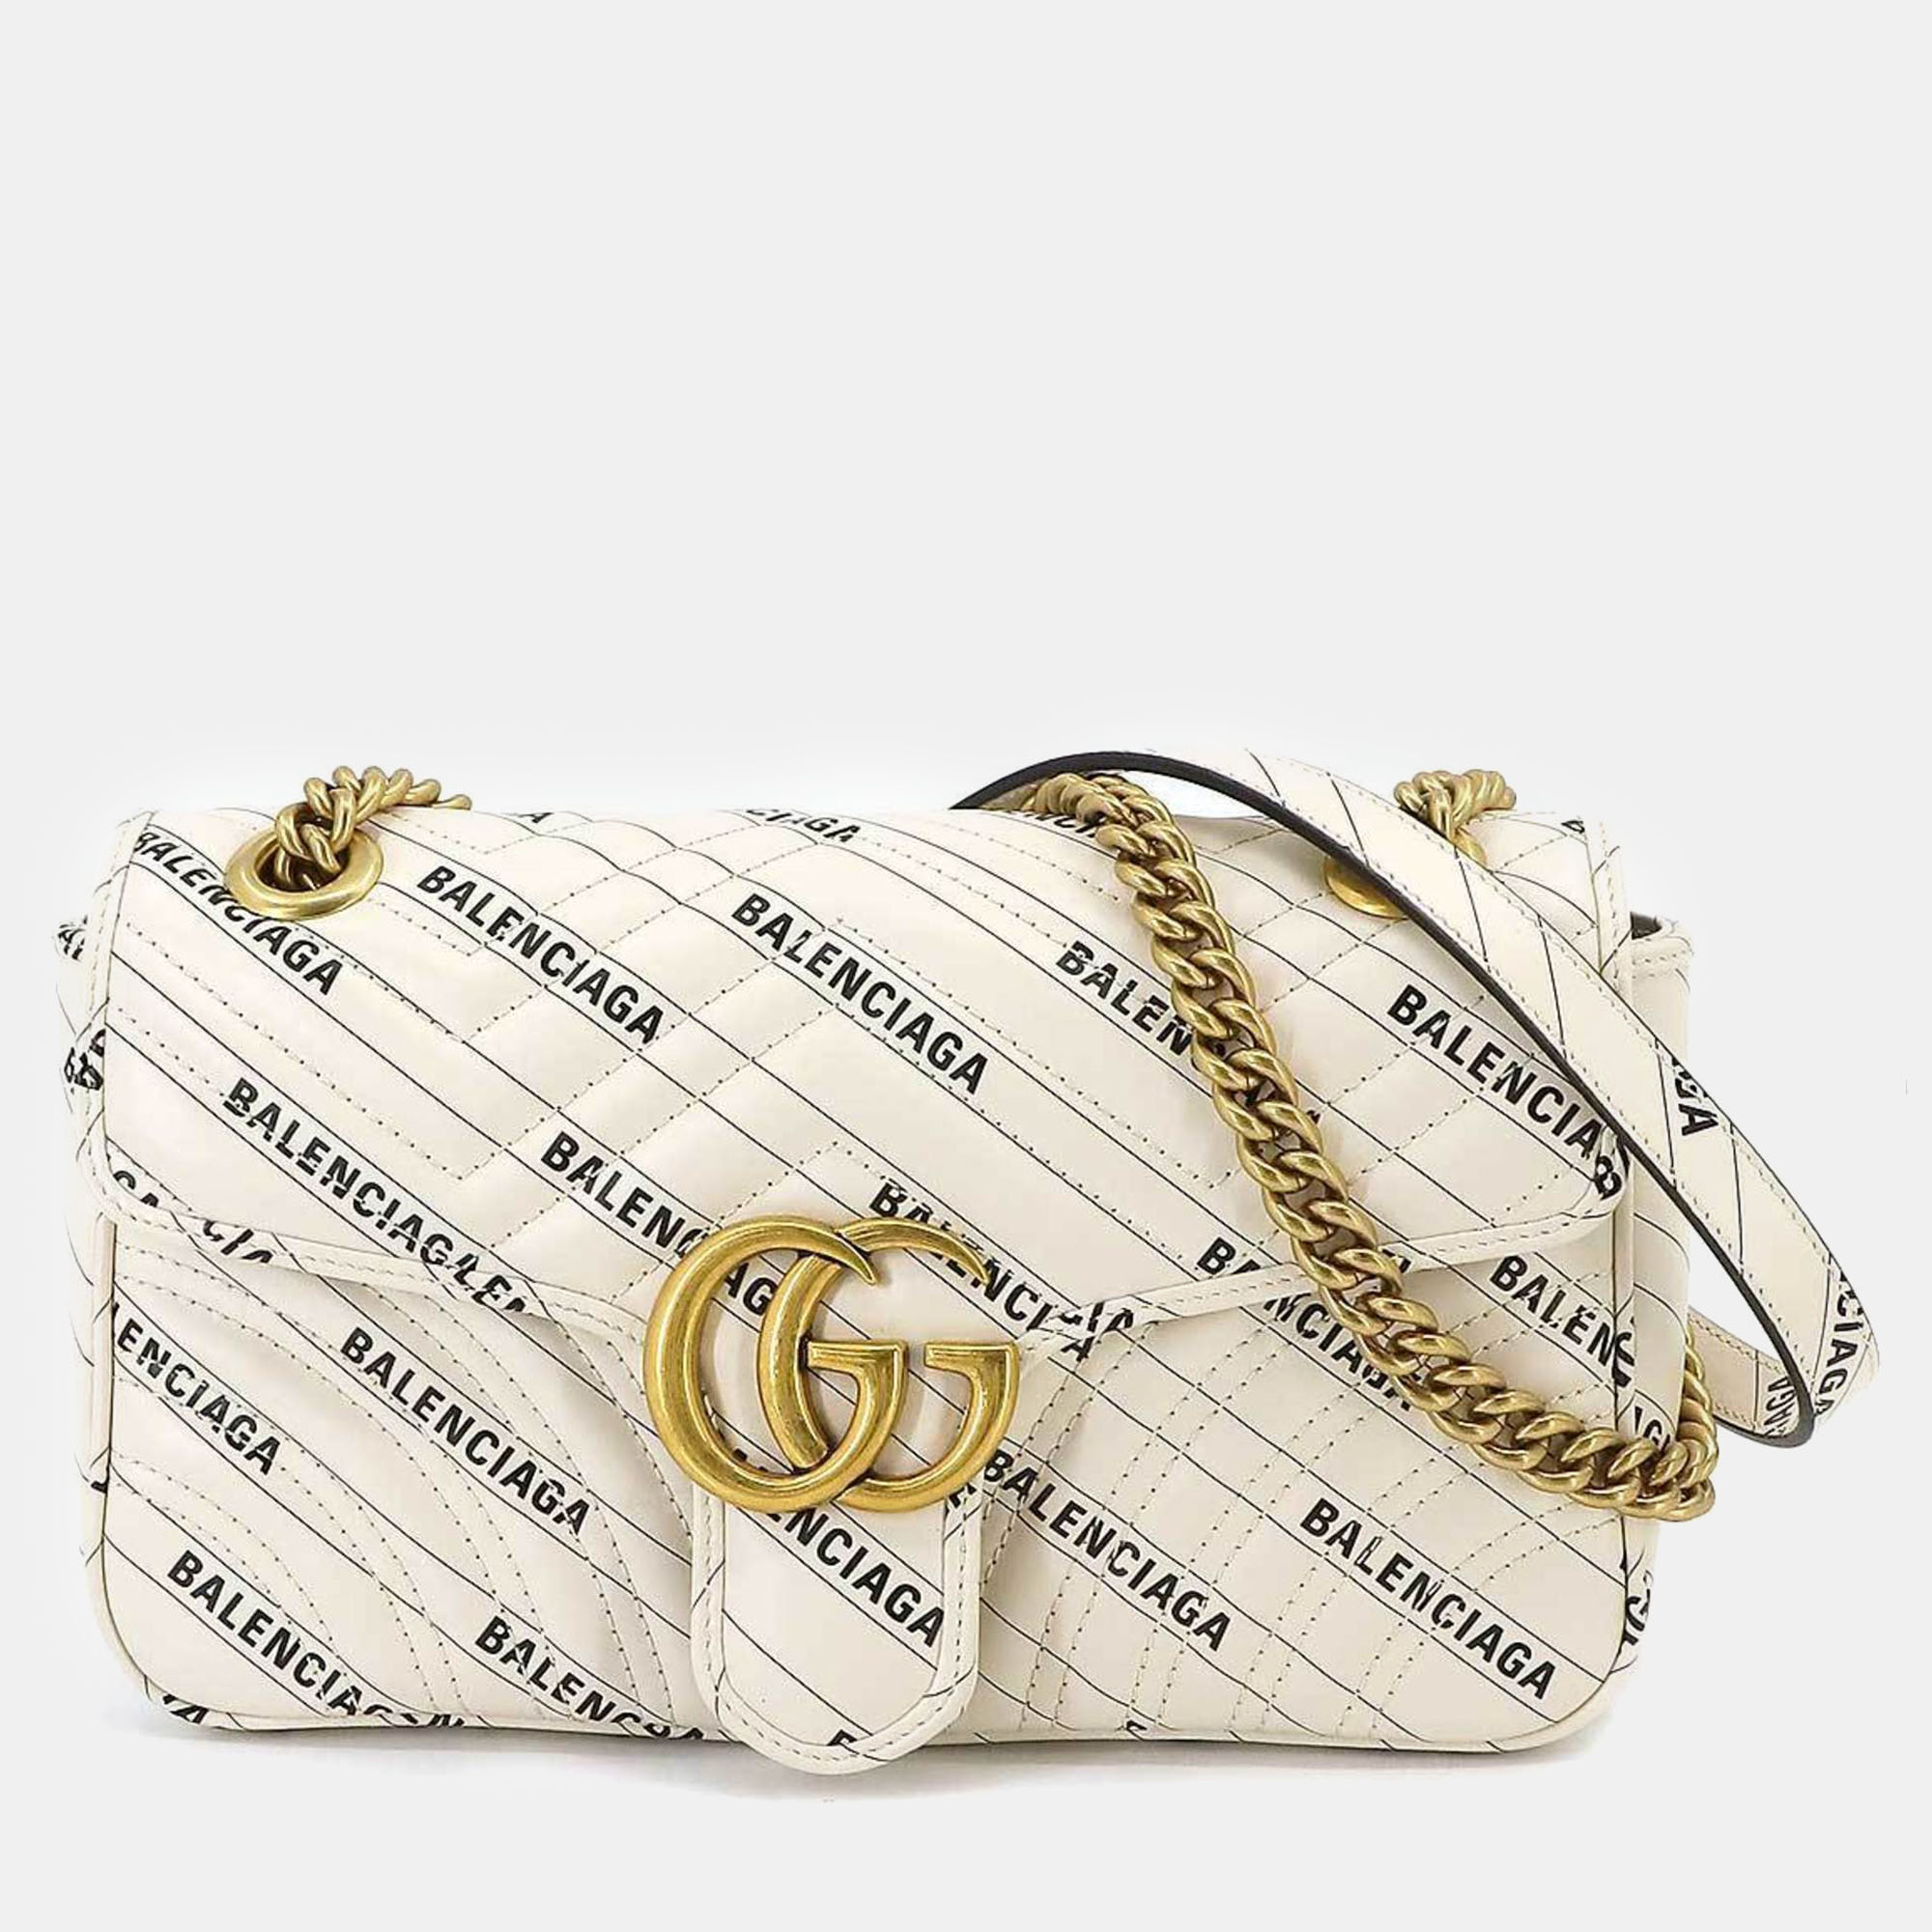 

Gucci x Balenciaga White Leather The Hacker Project GG Marmont Shoulder Bag